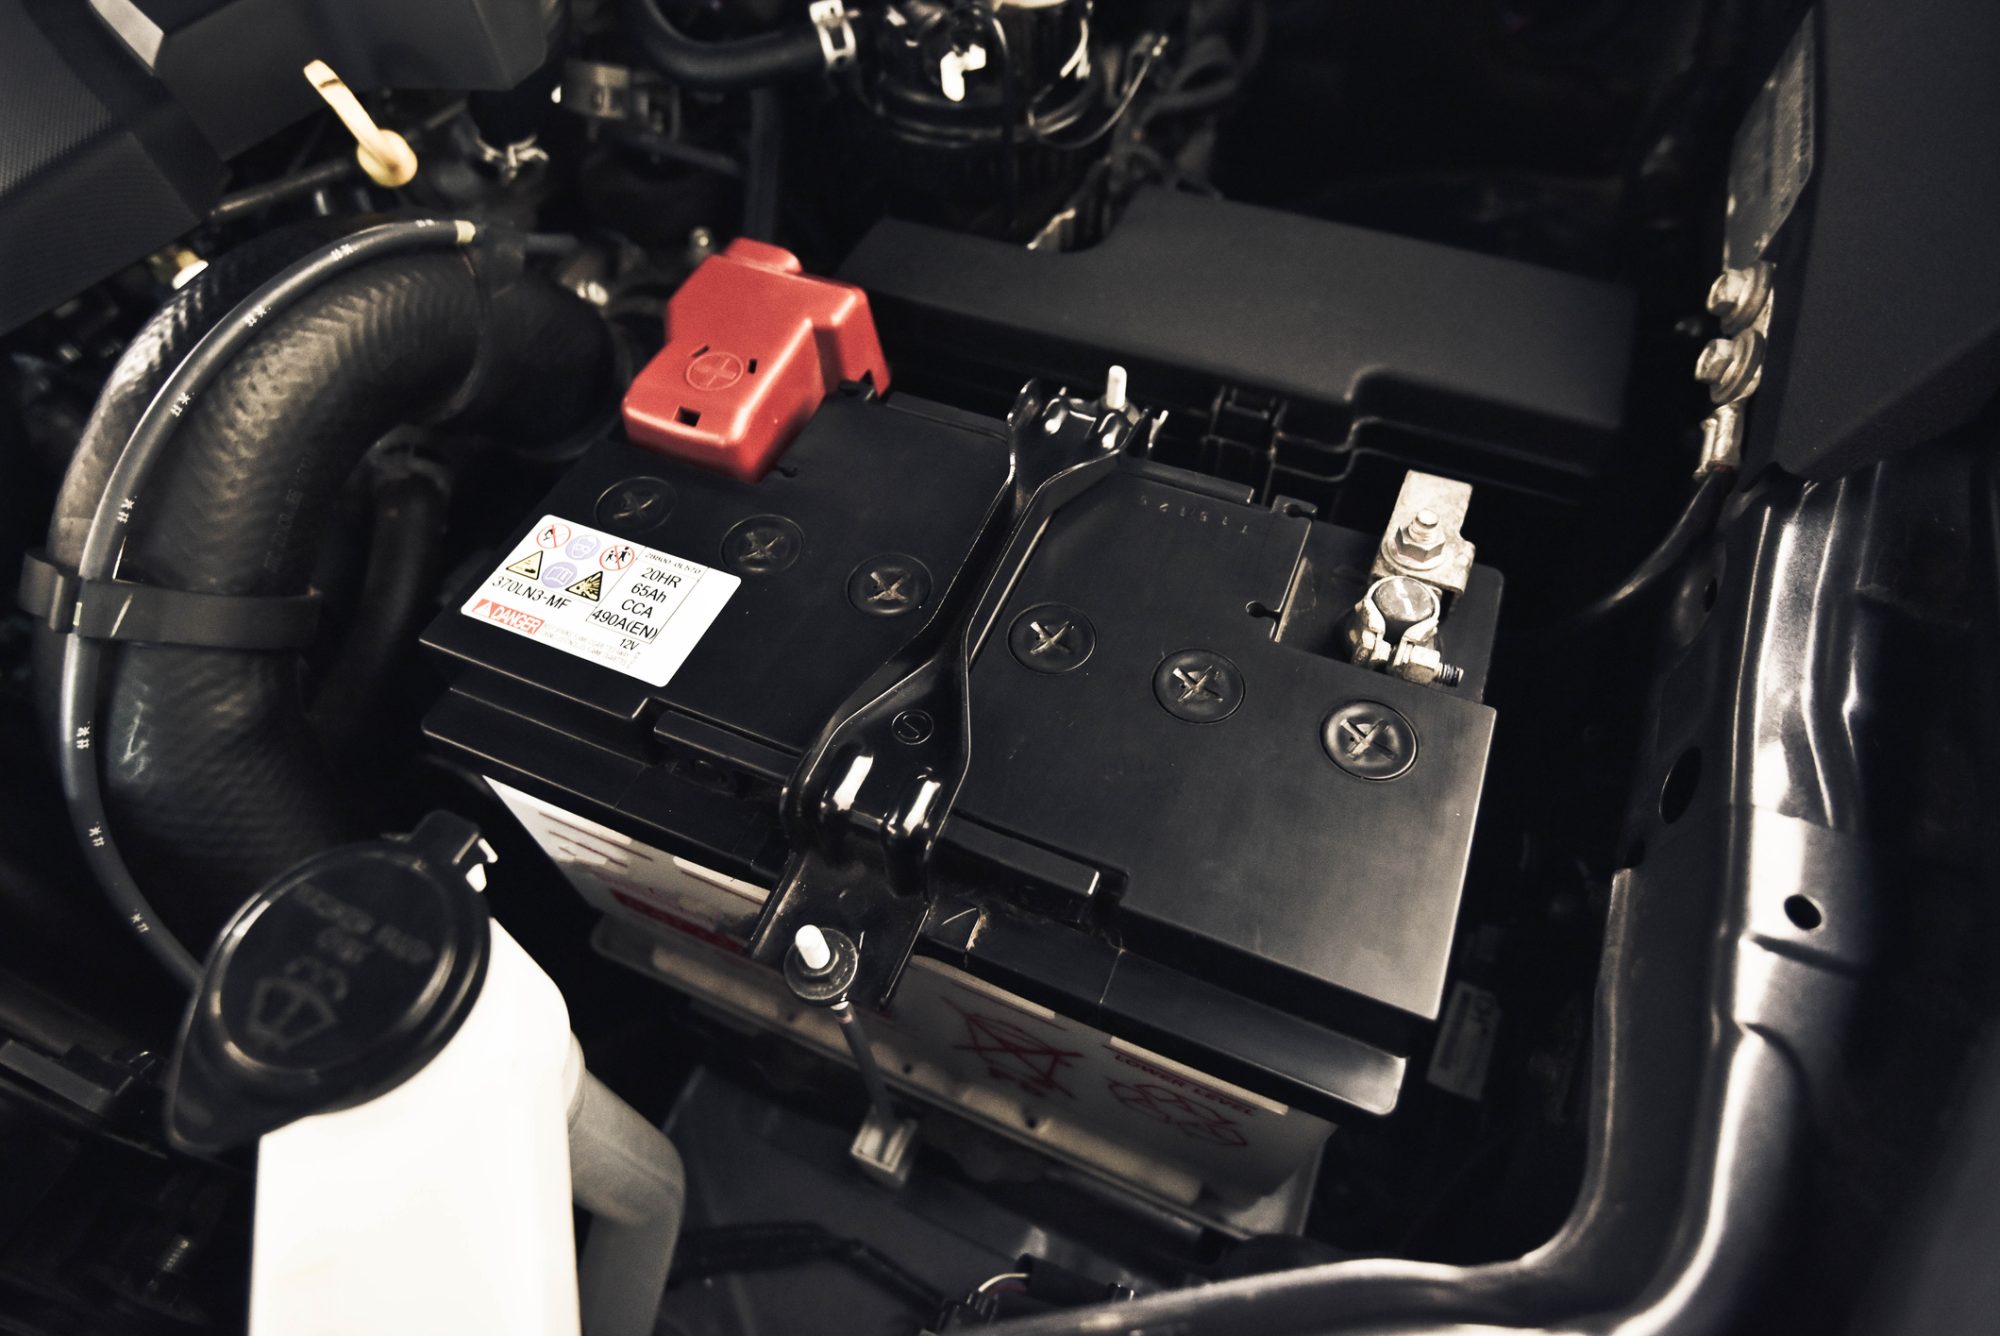 Car battery in the engine room